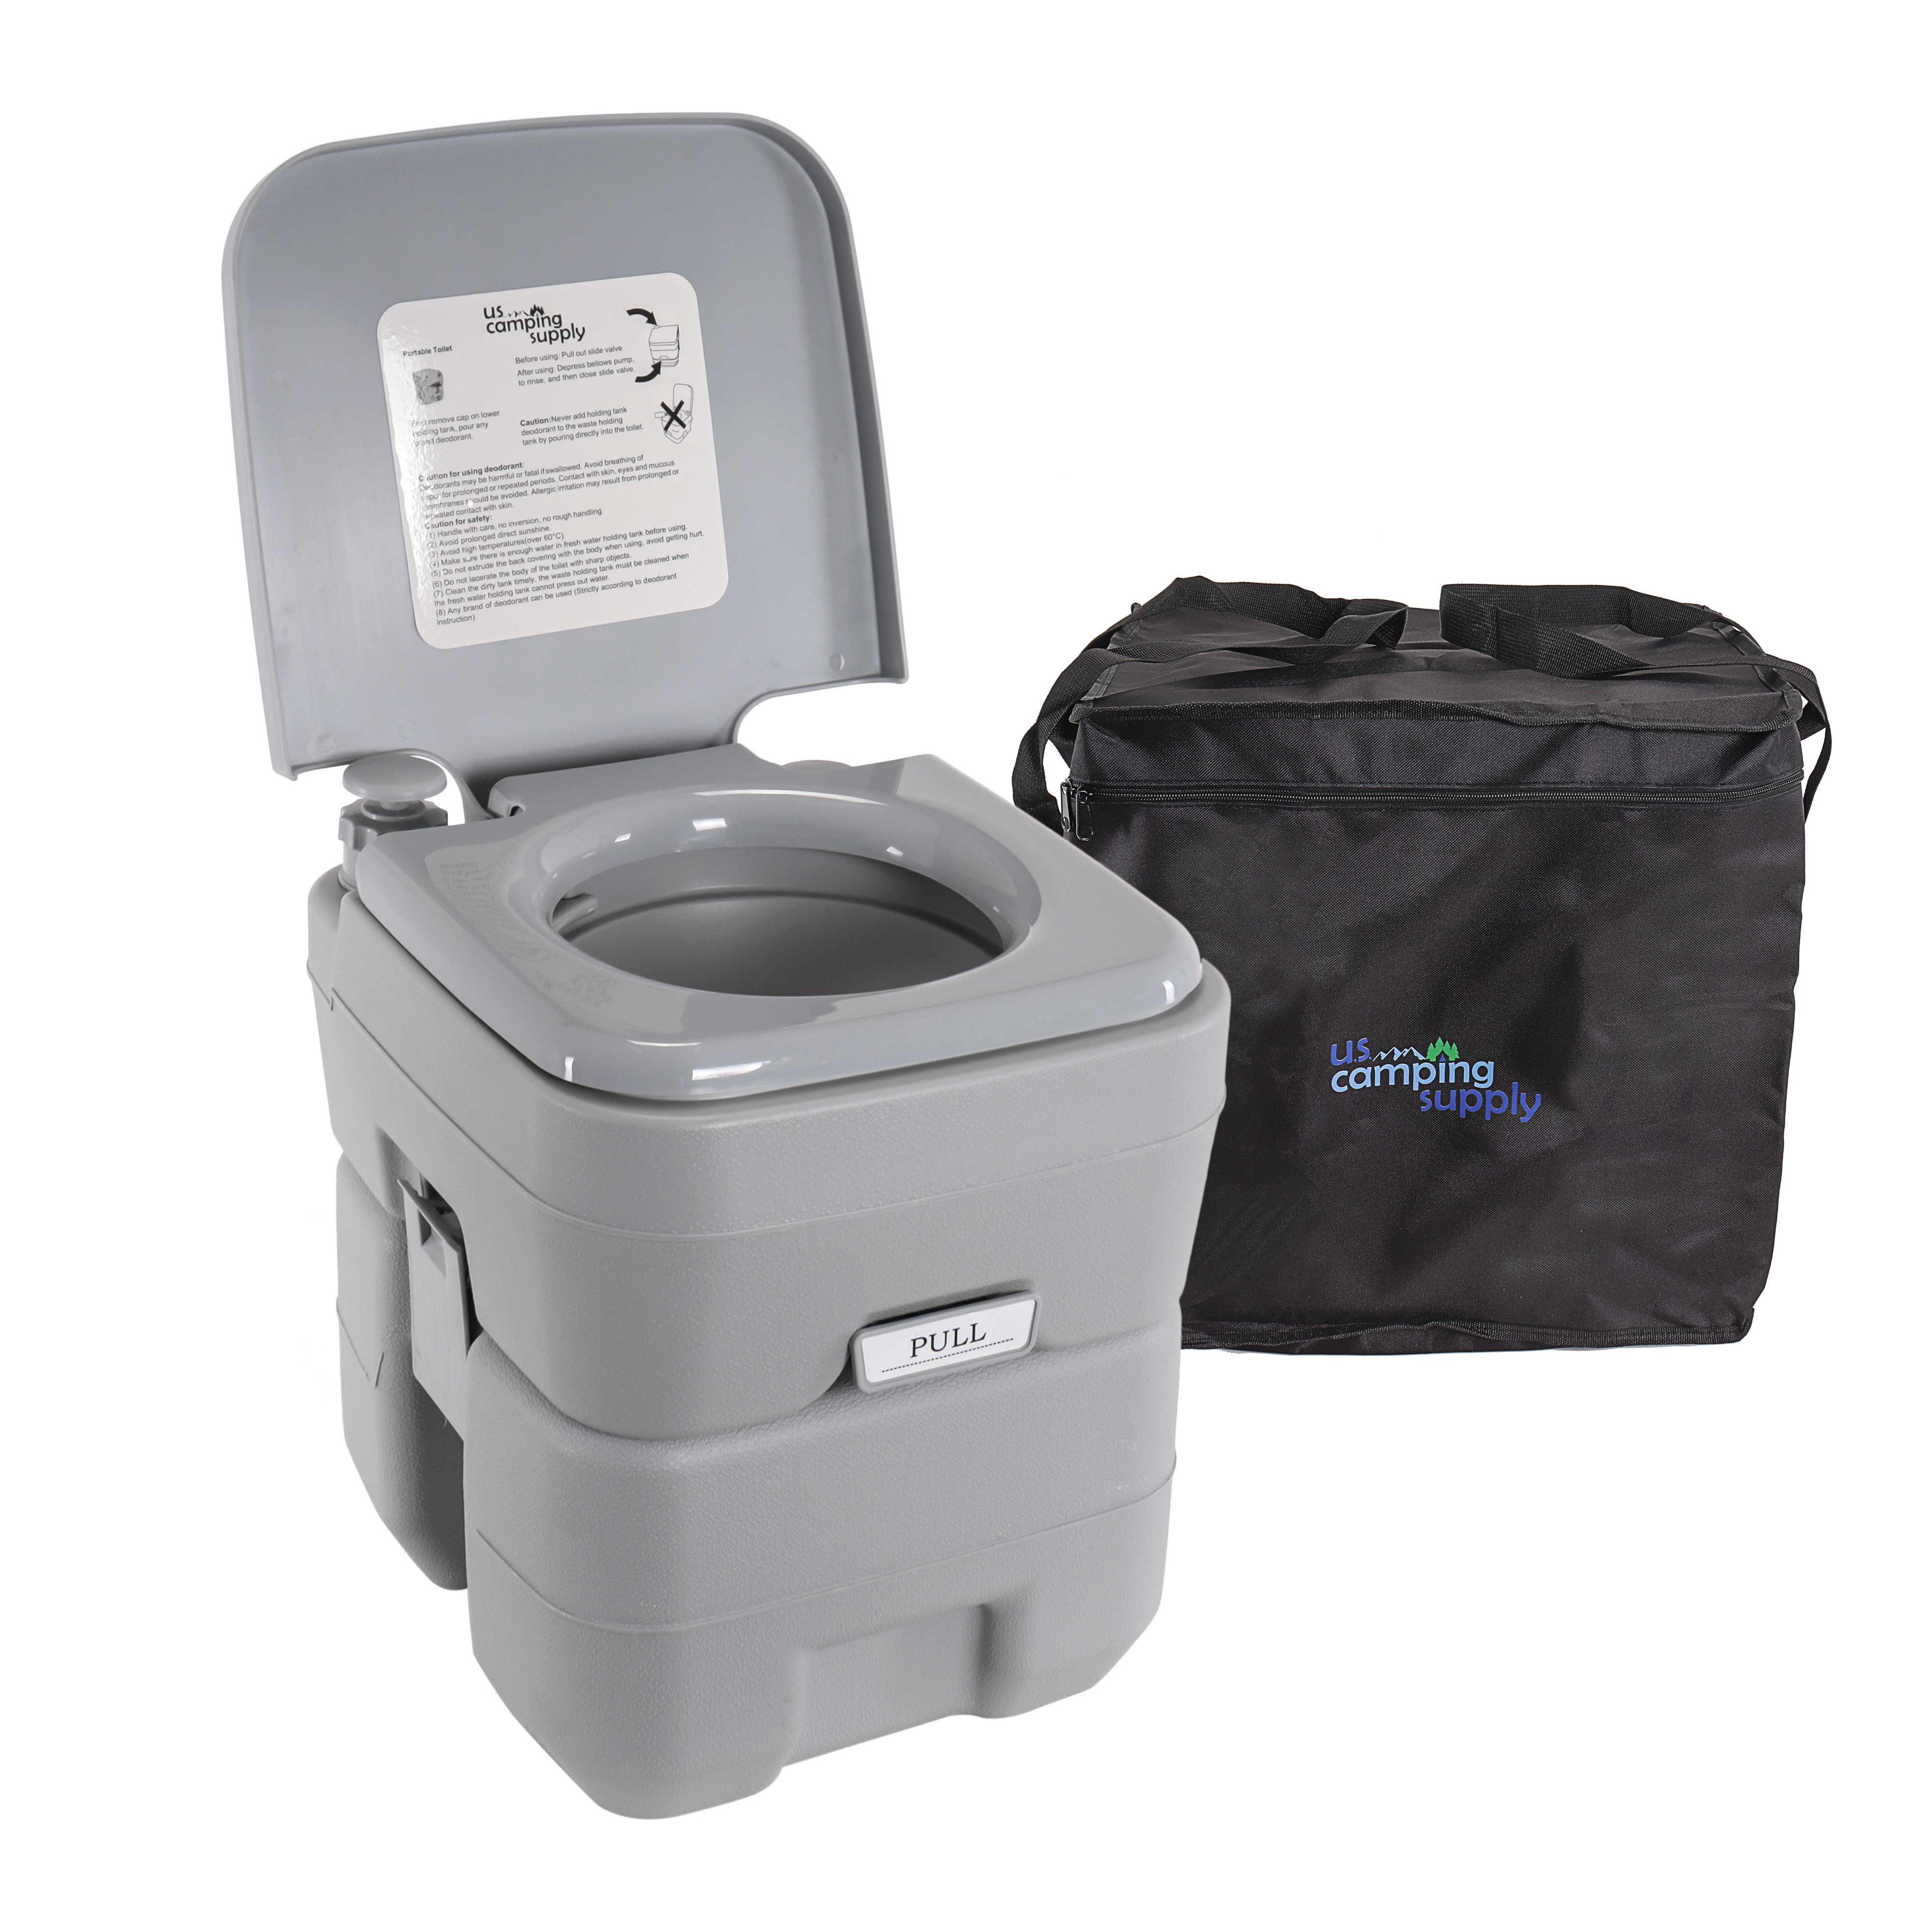 Cuadrante revista mediodía U.S. Camping Supply Portable Toilet with Carry Bag, 5.3 Gallon Waste Tank -  Compact Indoor Outdoor Dual Outlet Commode - Travel, Camping, RV, Boating,  Fishing - Traveling Bathroom, Water Flush Pump - Walmart.com